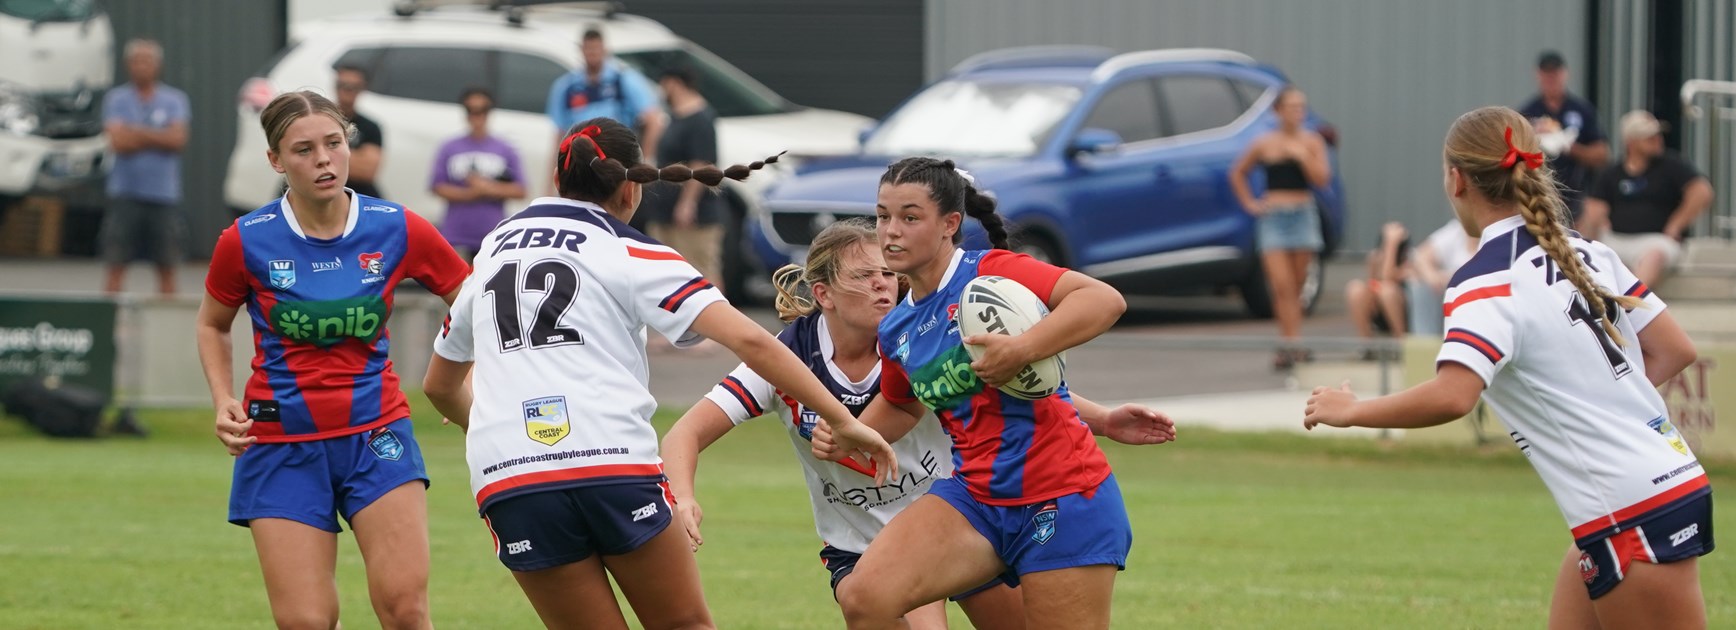 Pathways Report: Three on the trot for Lisa Fiaola squad